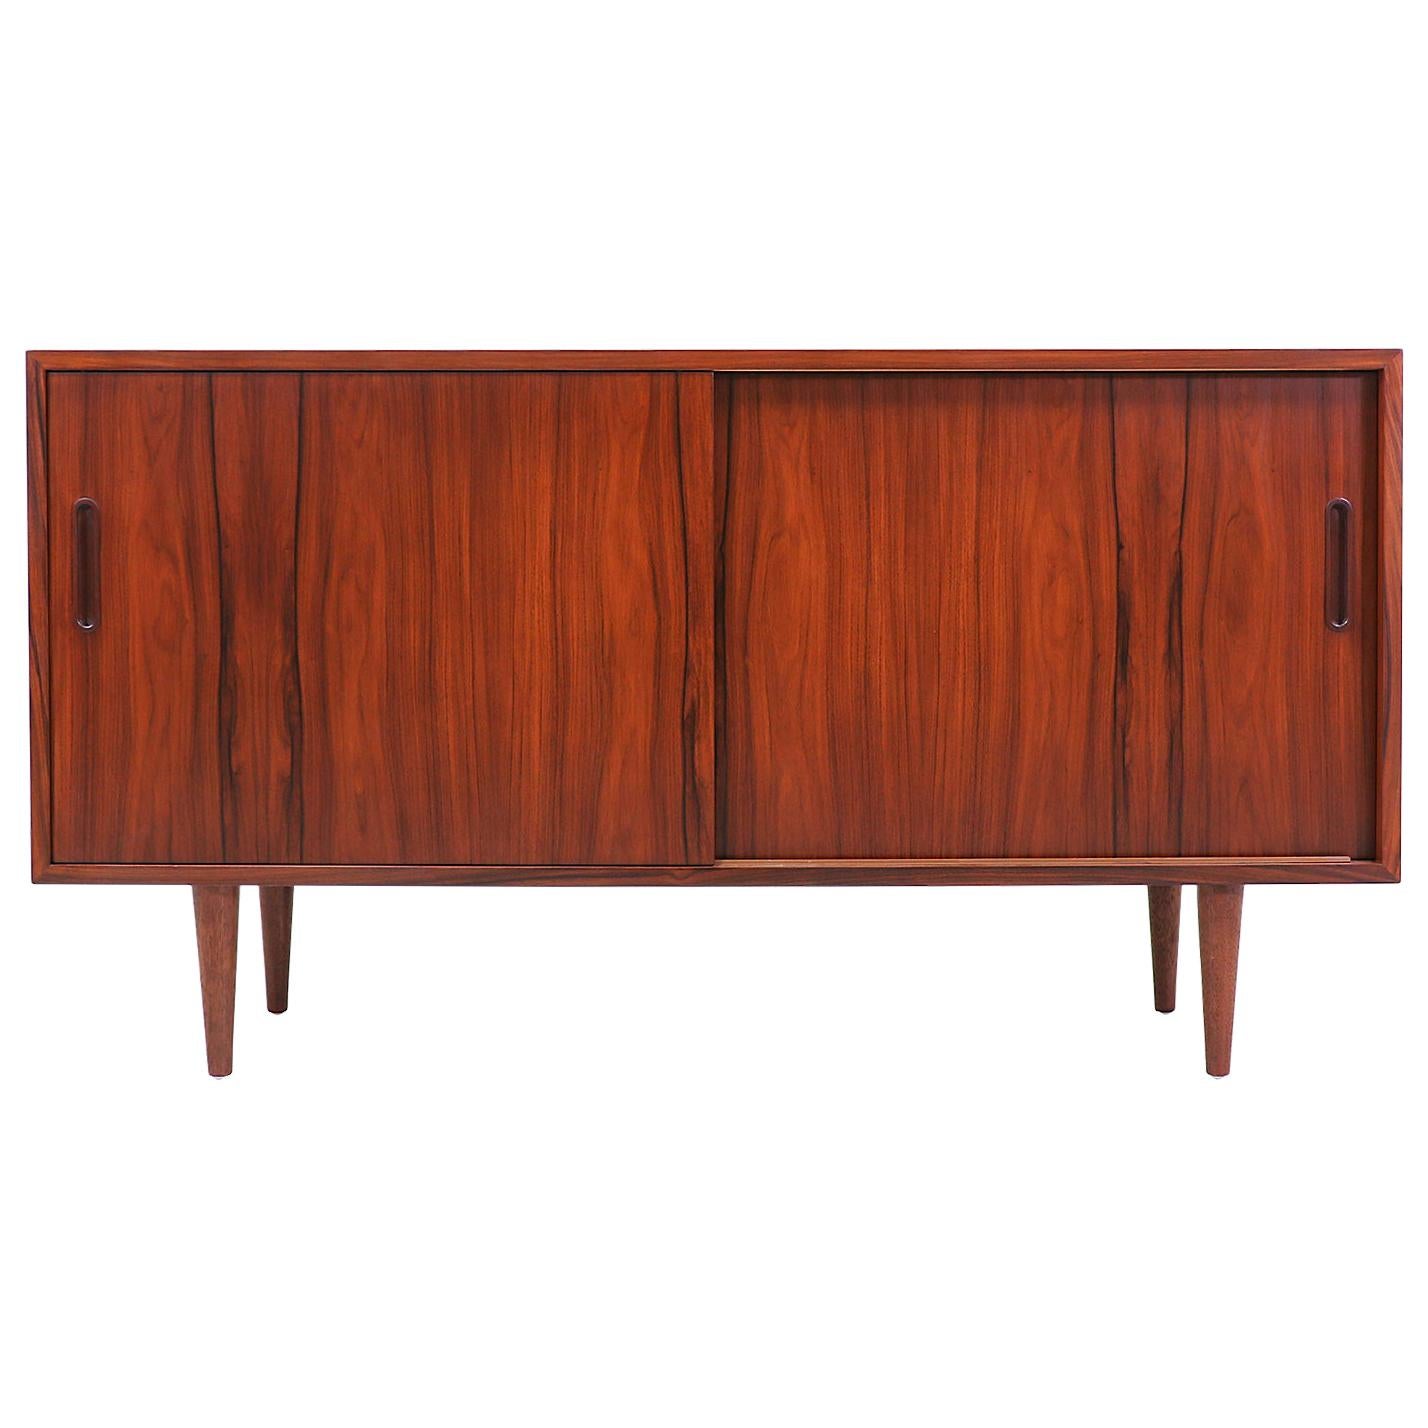 Danish Modern Rosewood Credenza by Carlo Jensen for Hundevad & Co.